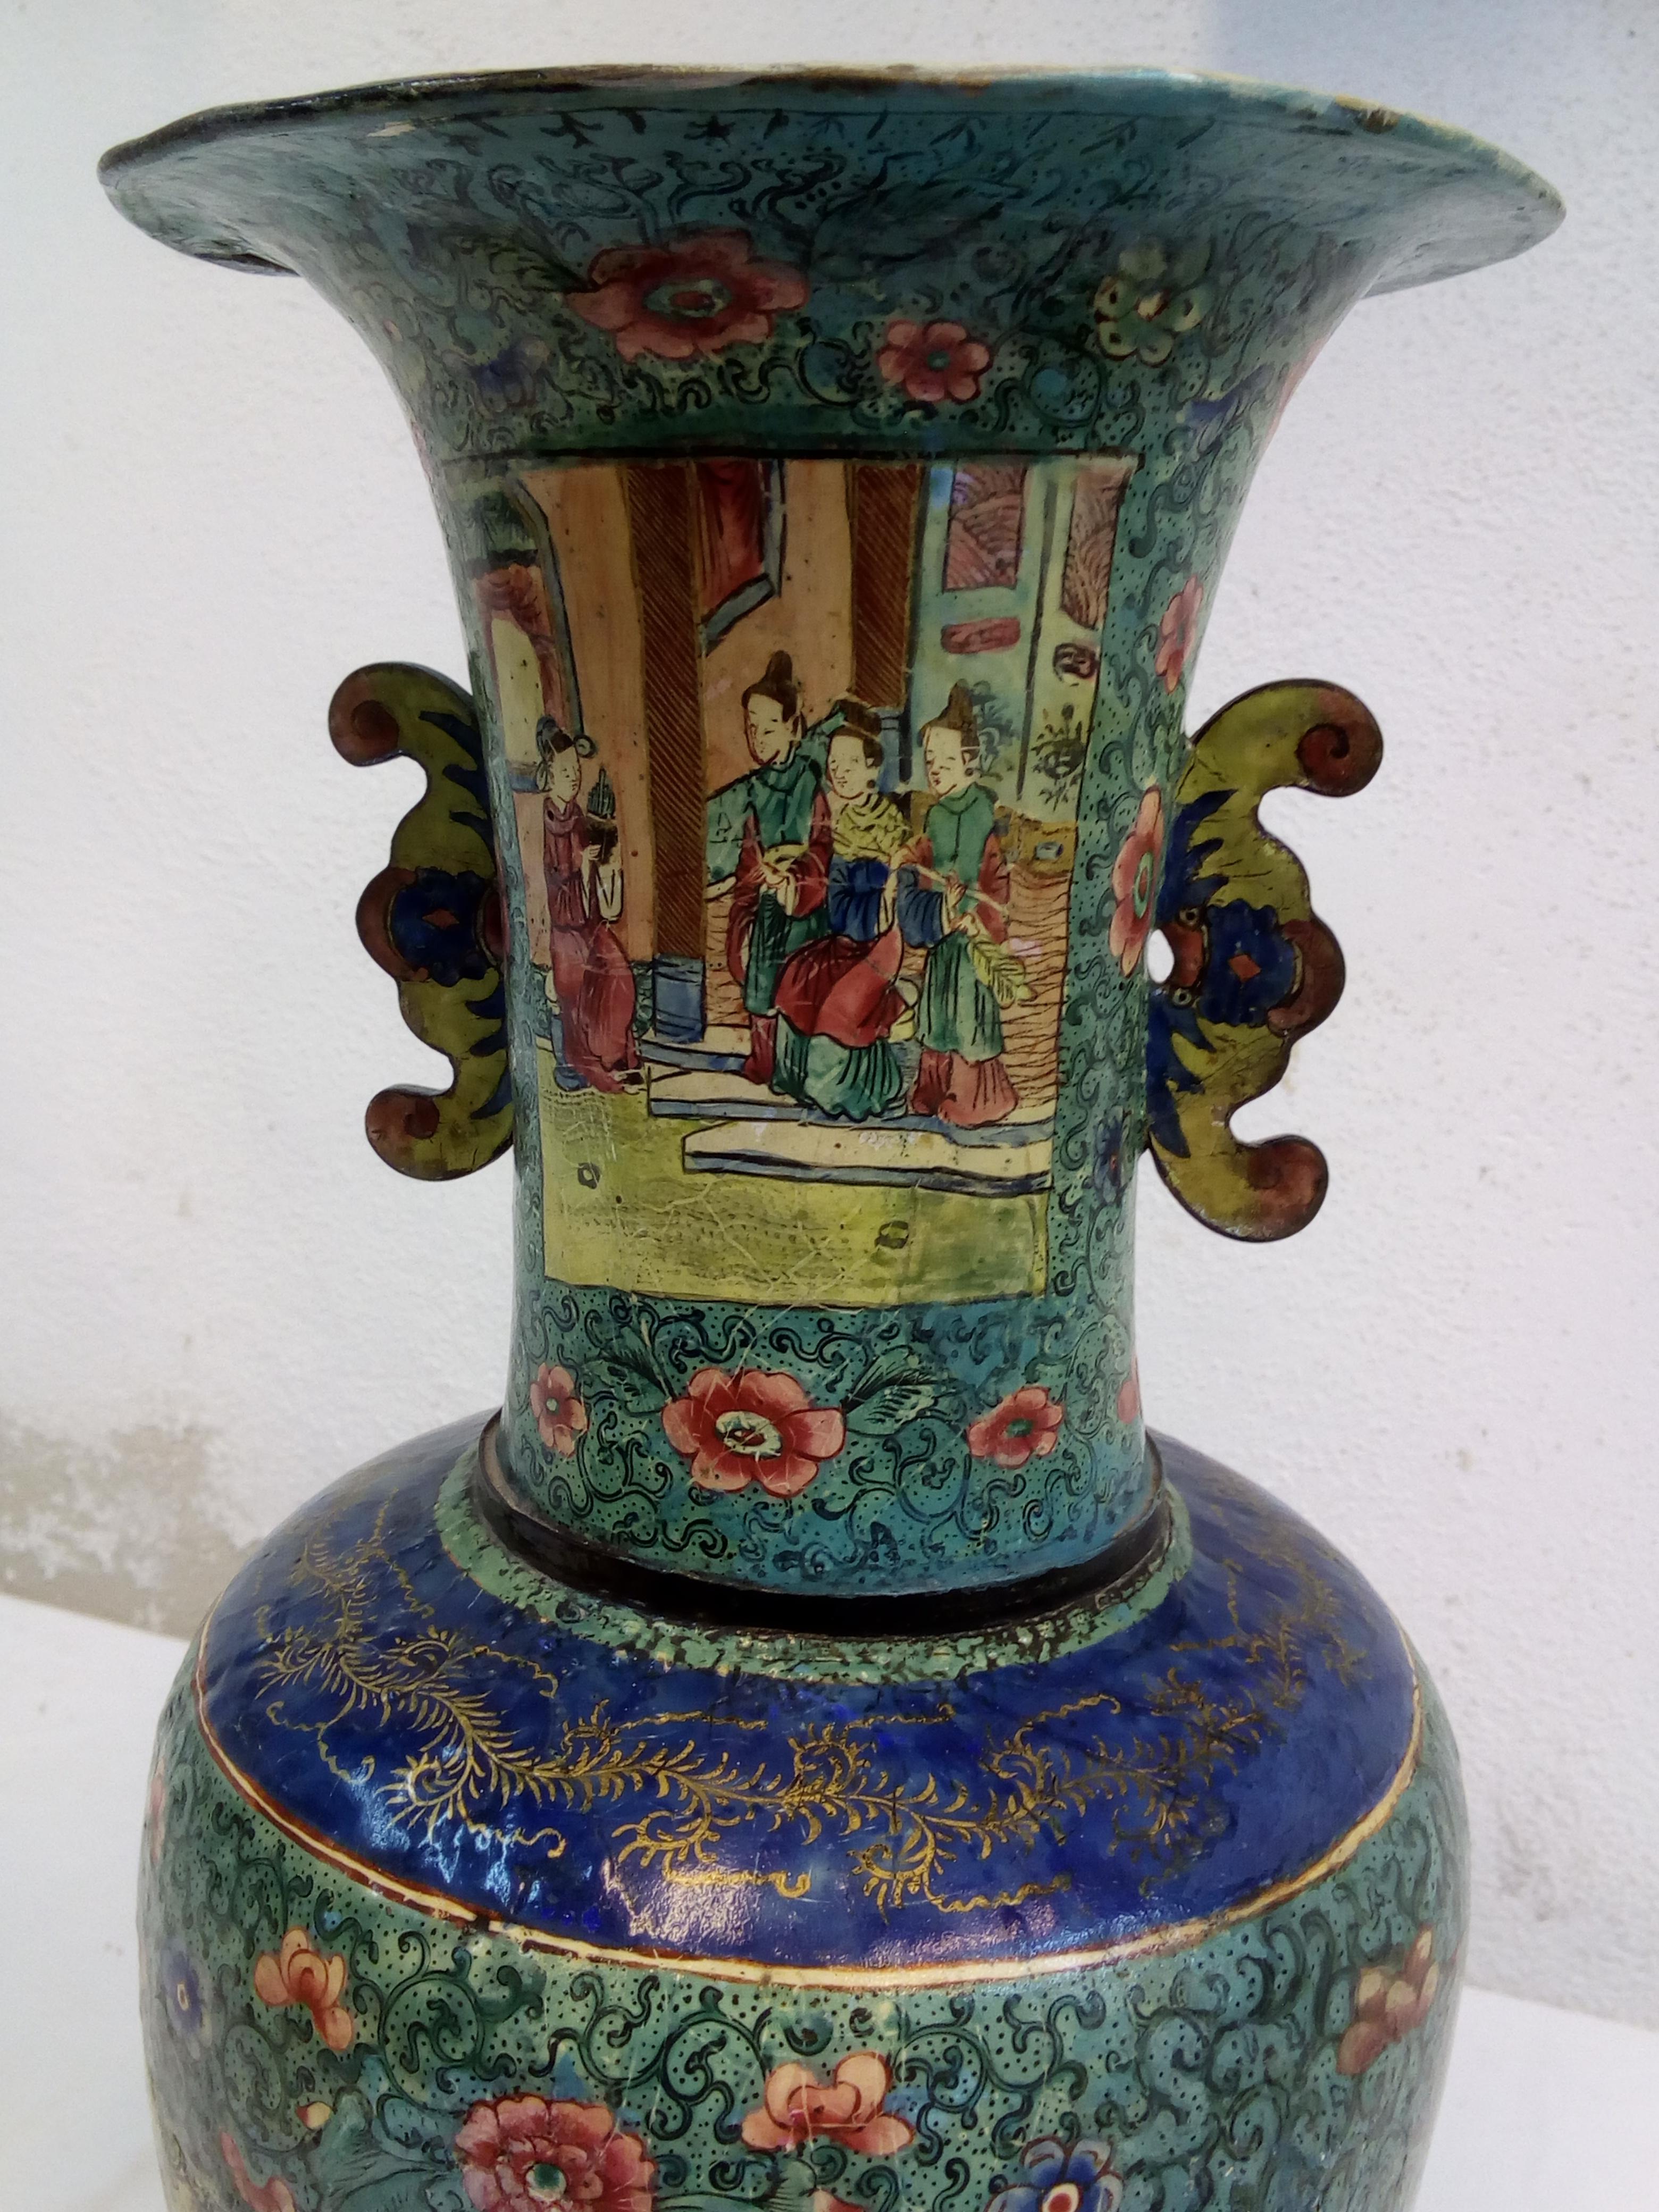 Description:
18th century French chinoiserie vase, in polychrome porcelain of the green family (yingcai), with a balustrade shape and a trumpet neck, decorated with scenes of court life within squared reserves, and the rest of the body decorated